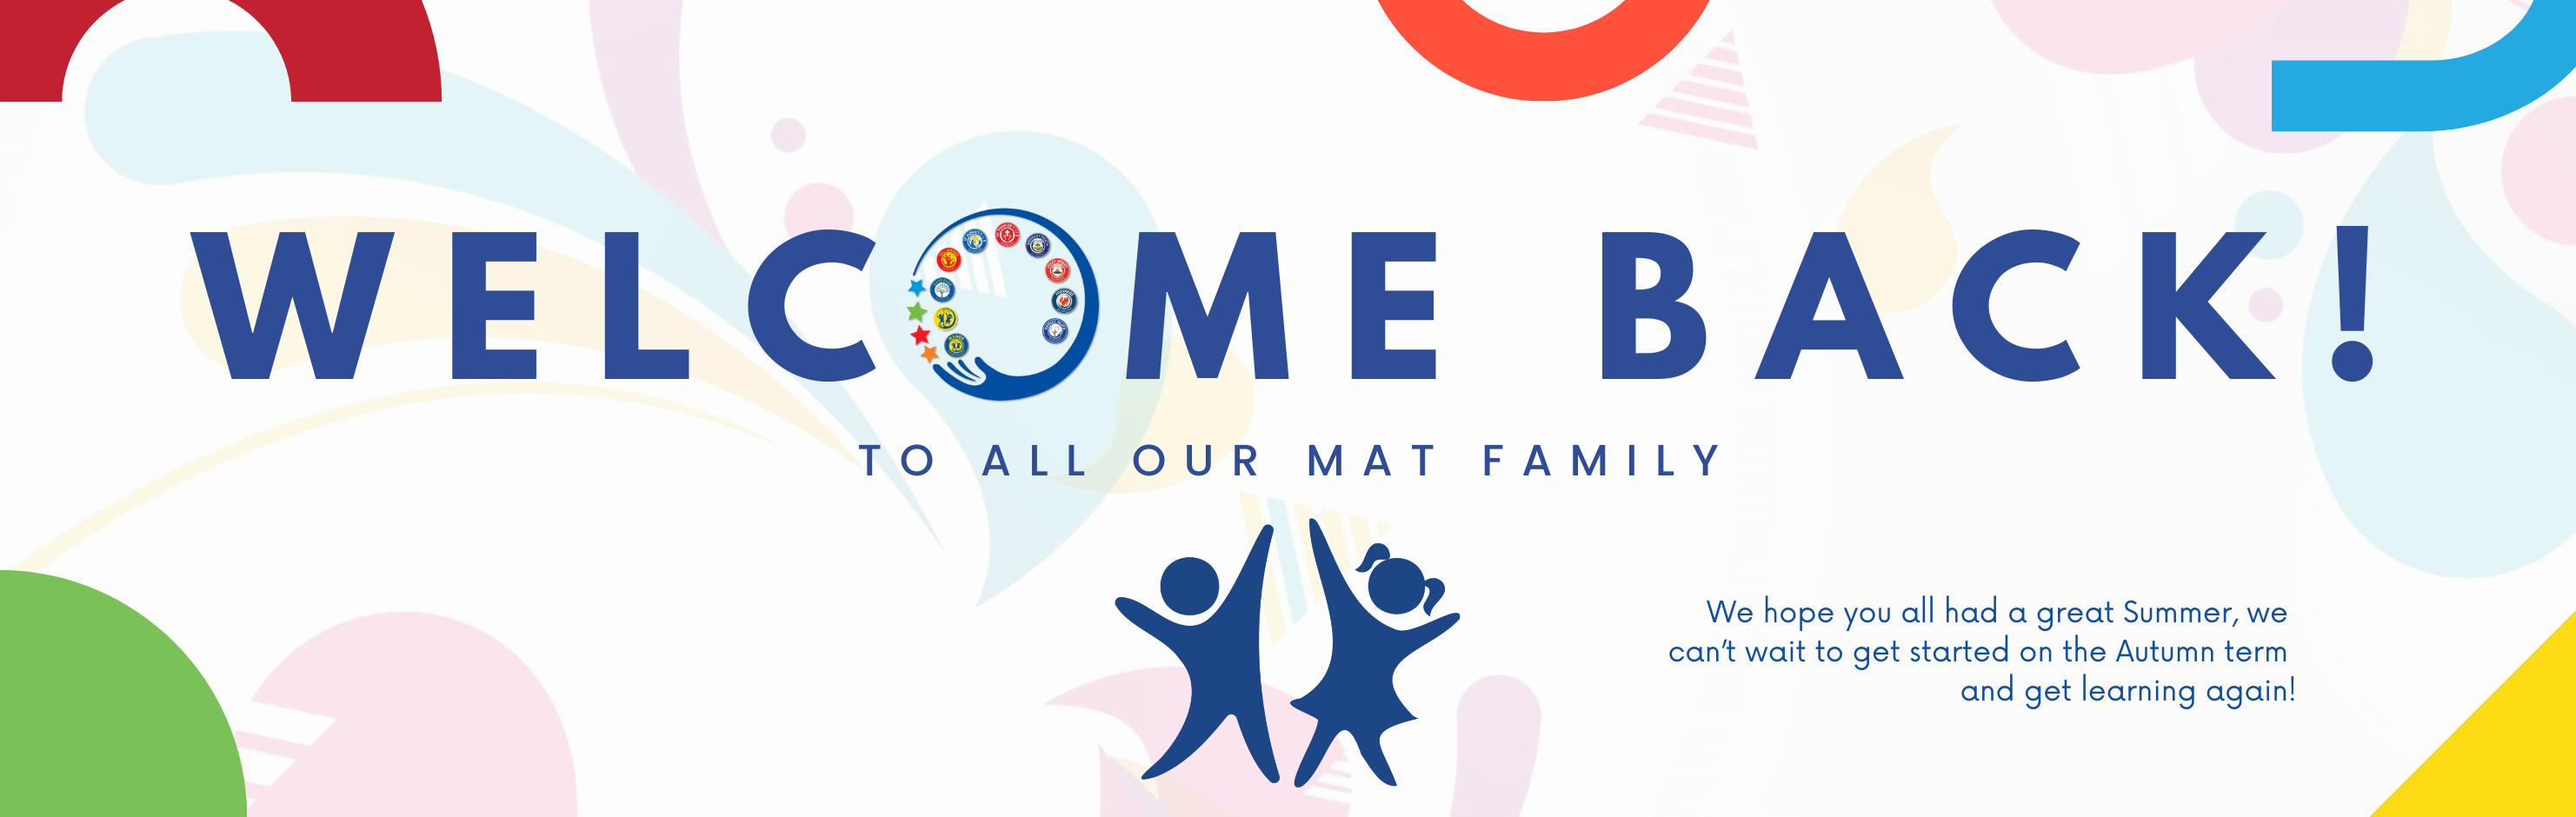 Welcome back MAT family!